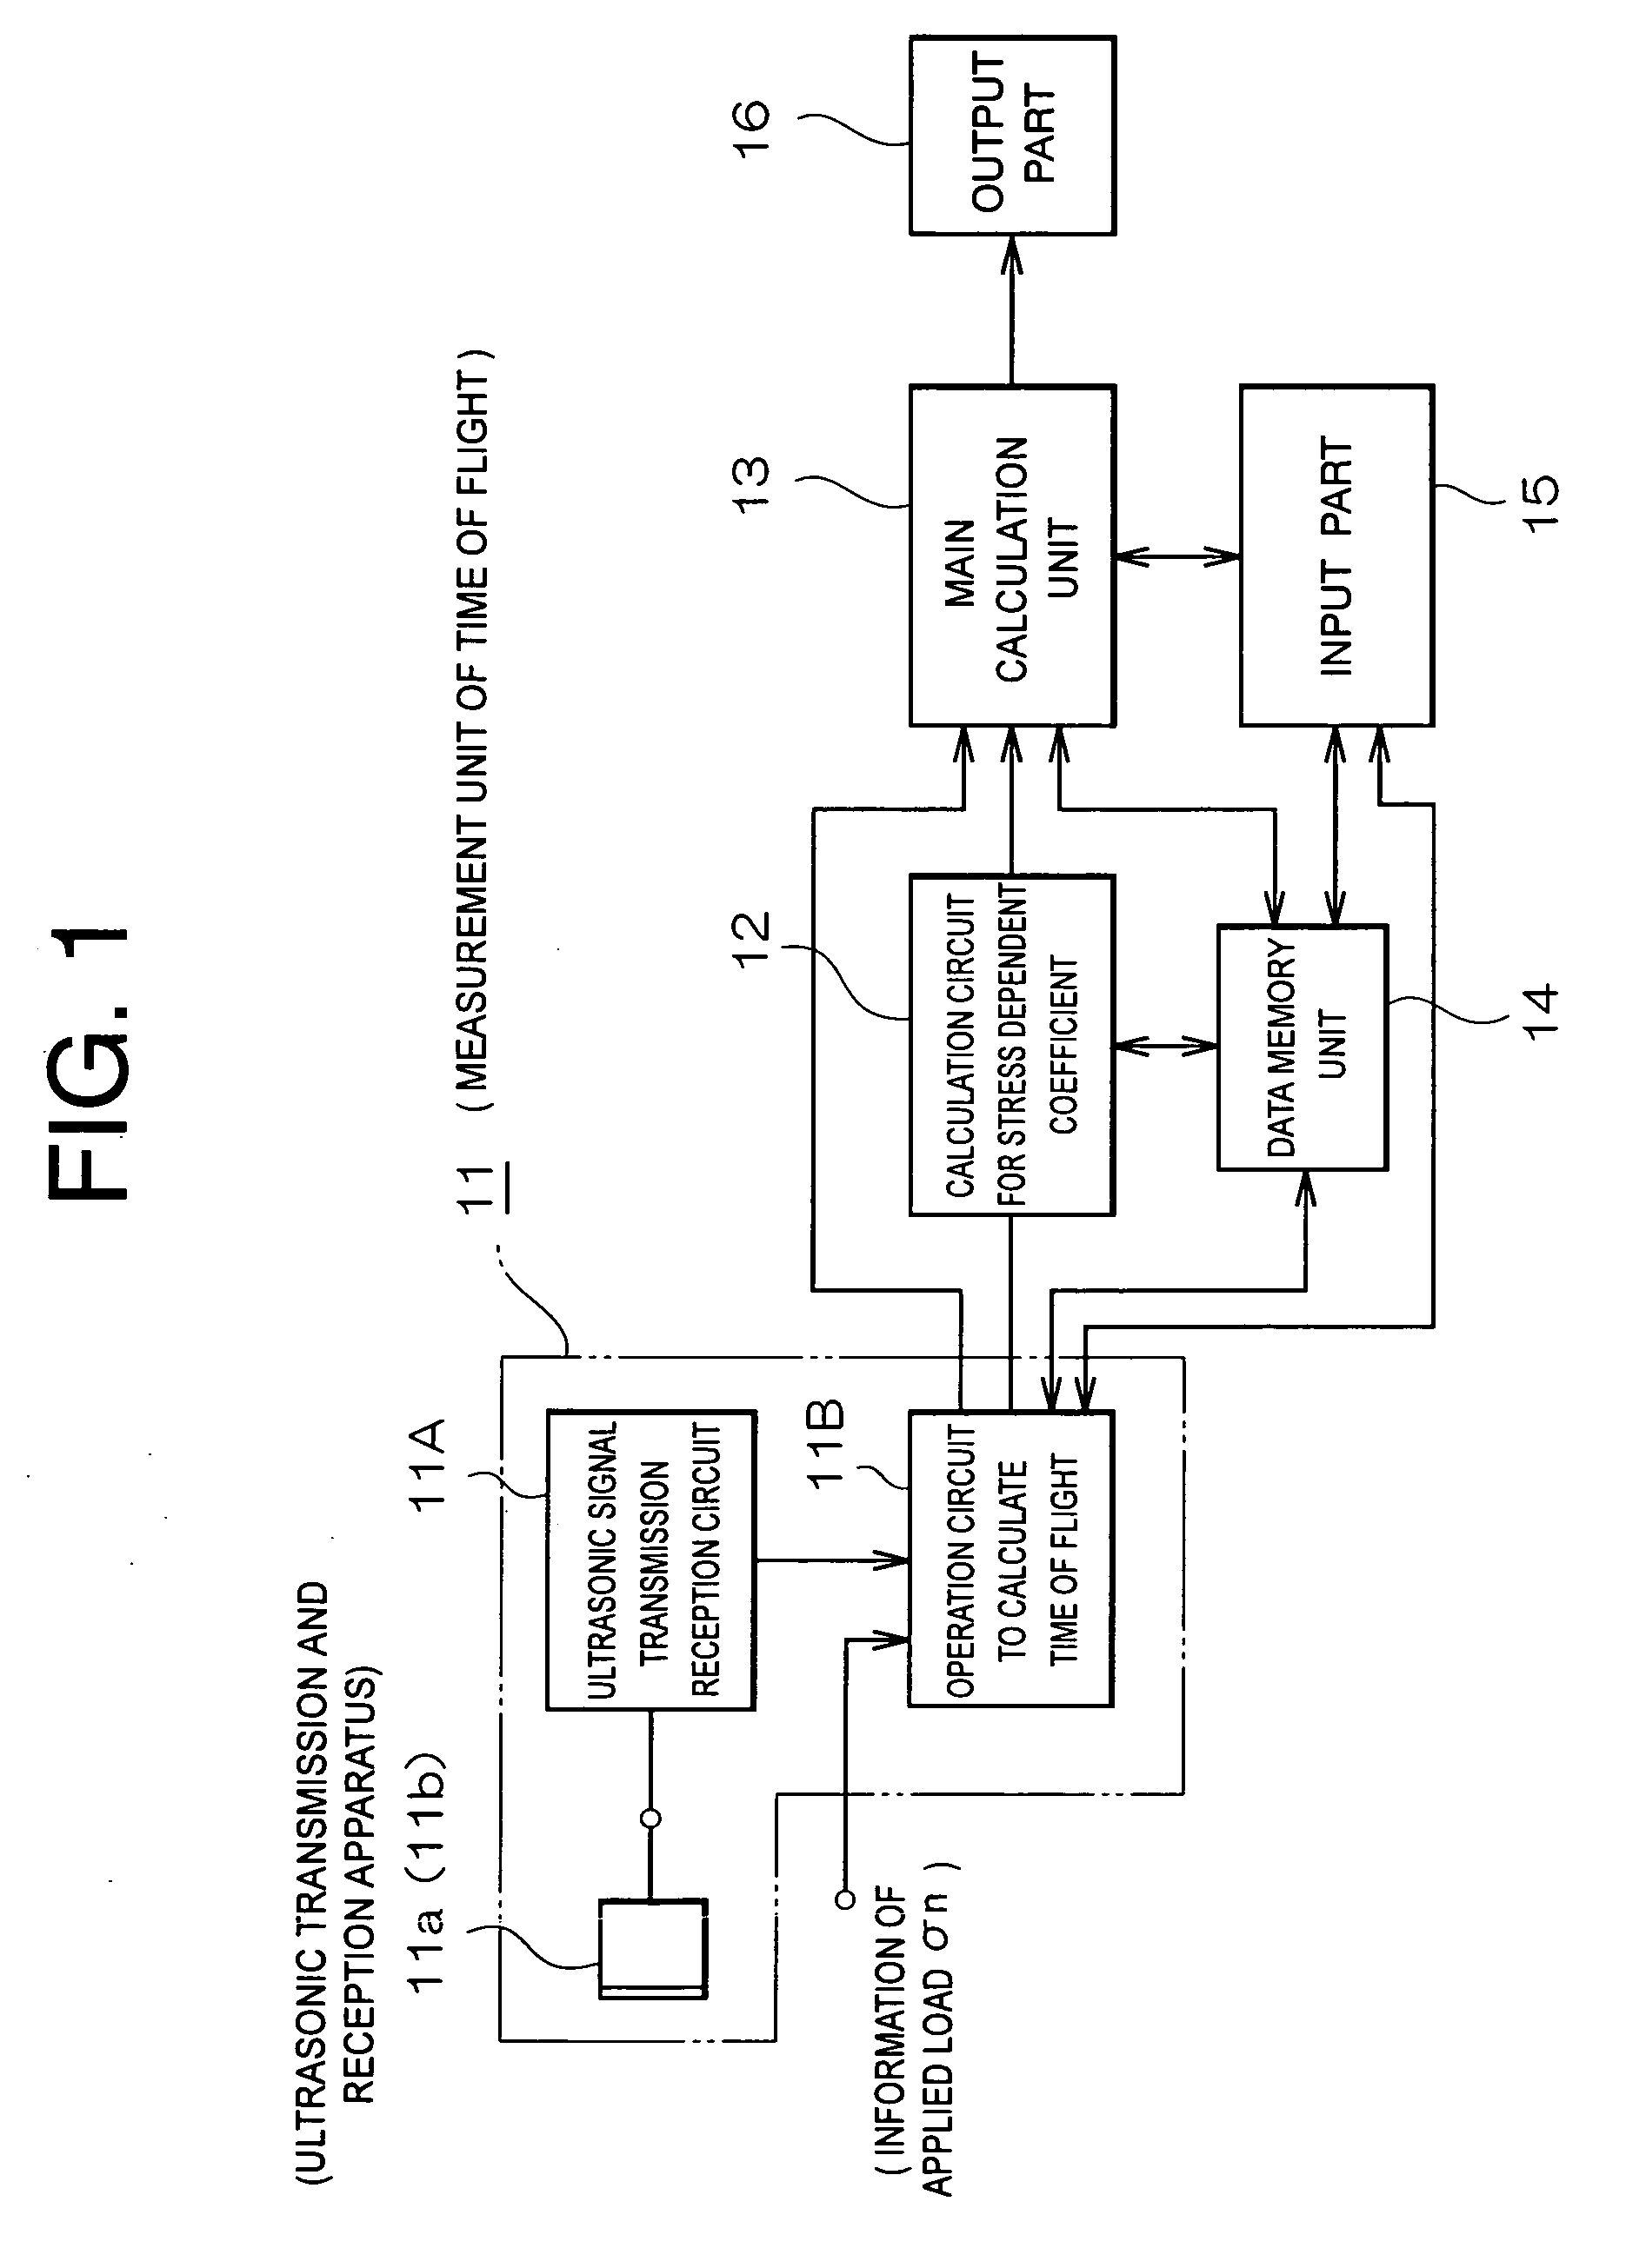 Stress measurement method and its apparatus